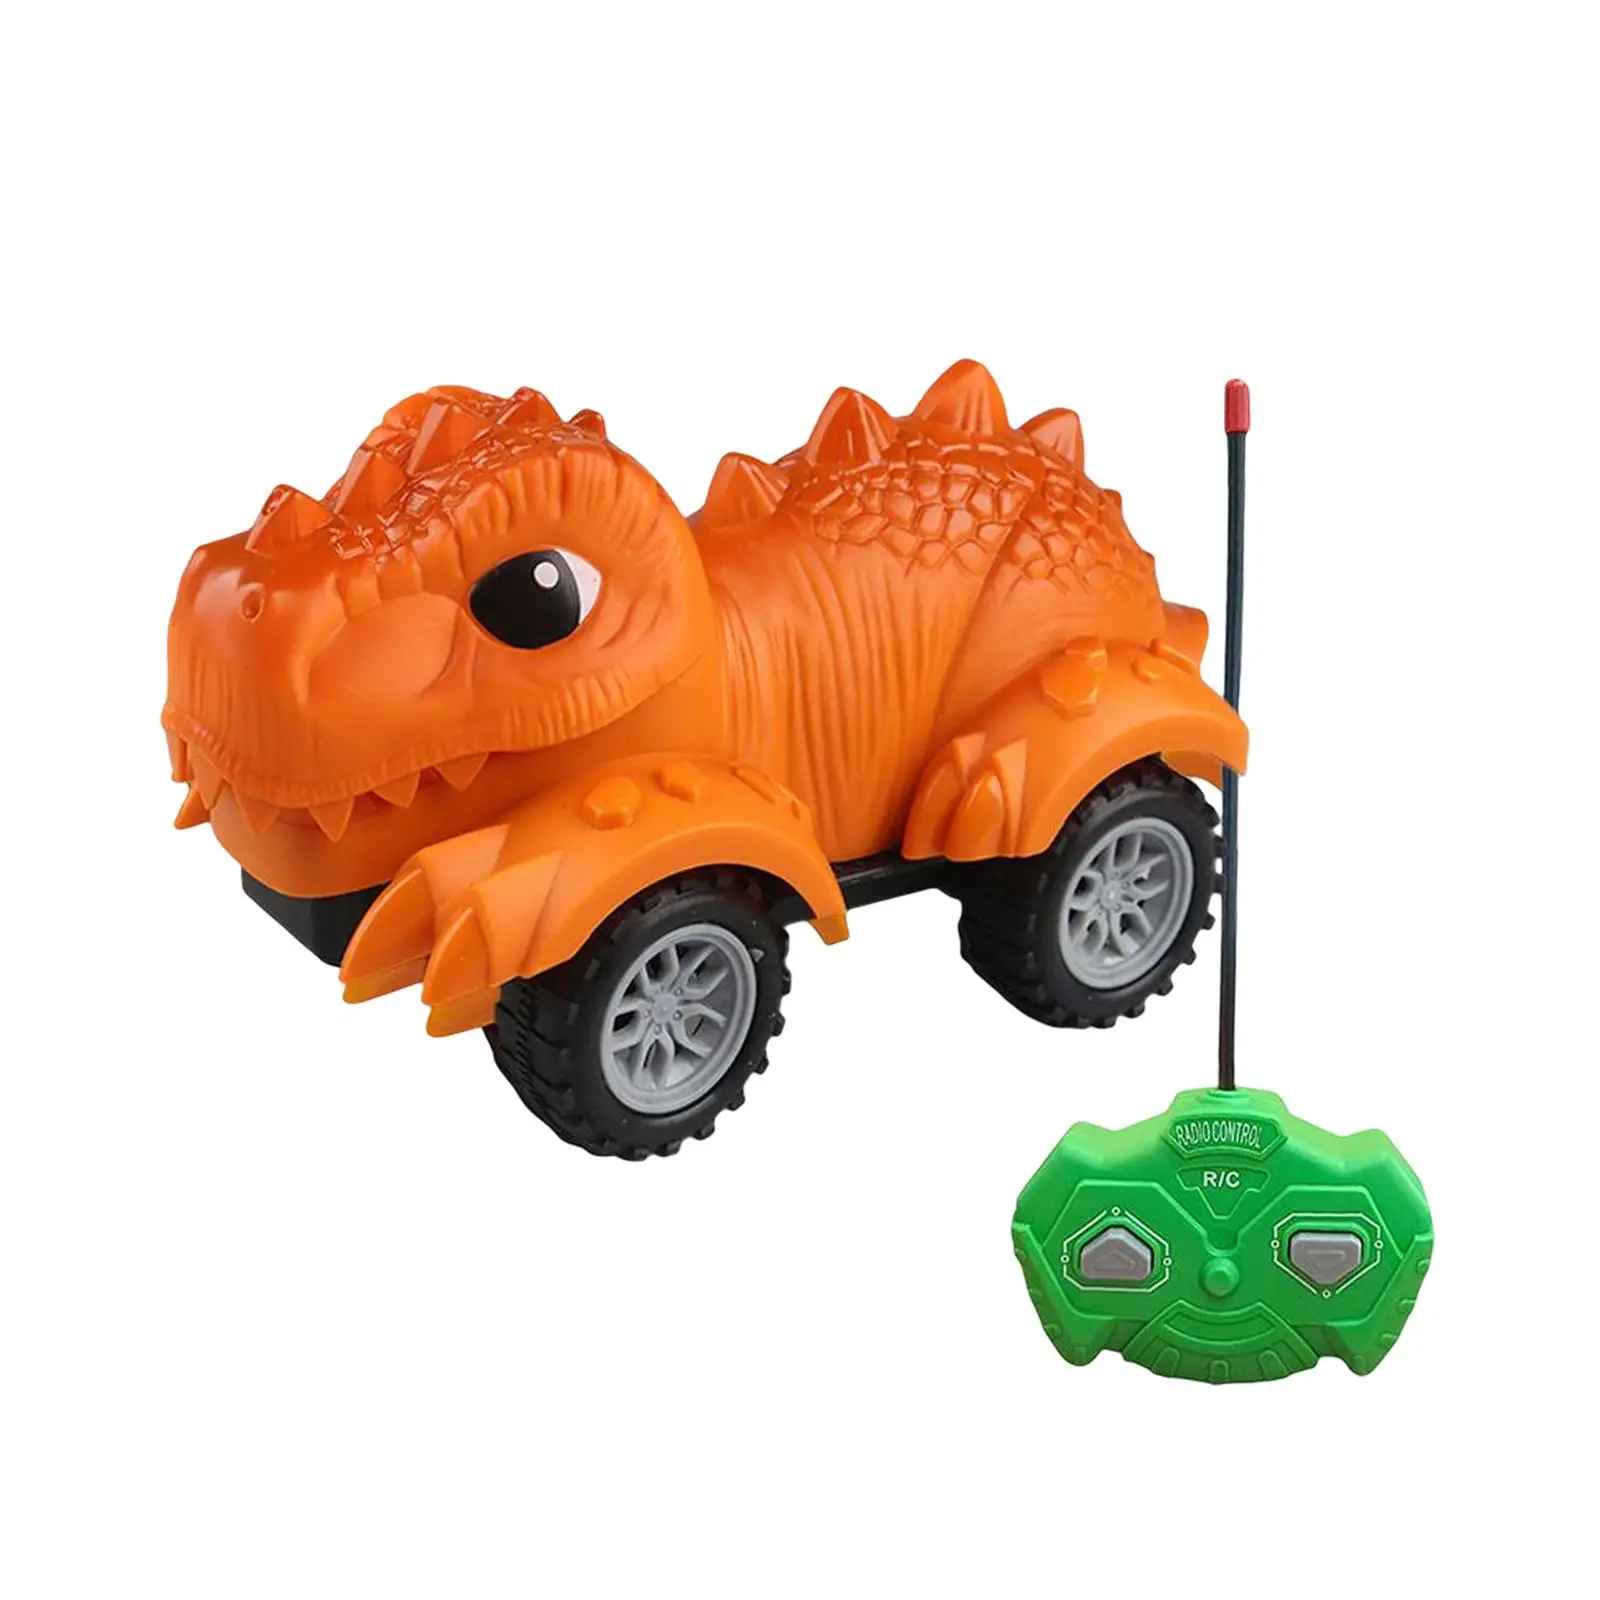 Creative Dinosaur Toy Car DIY Disassembly Battery Operated RC Race car Car for Christmas Gifts Children Boys 3-5